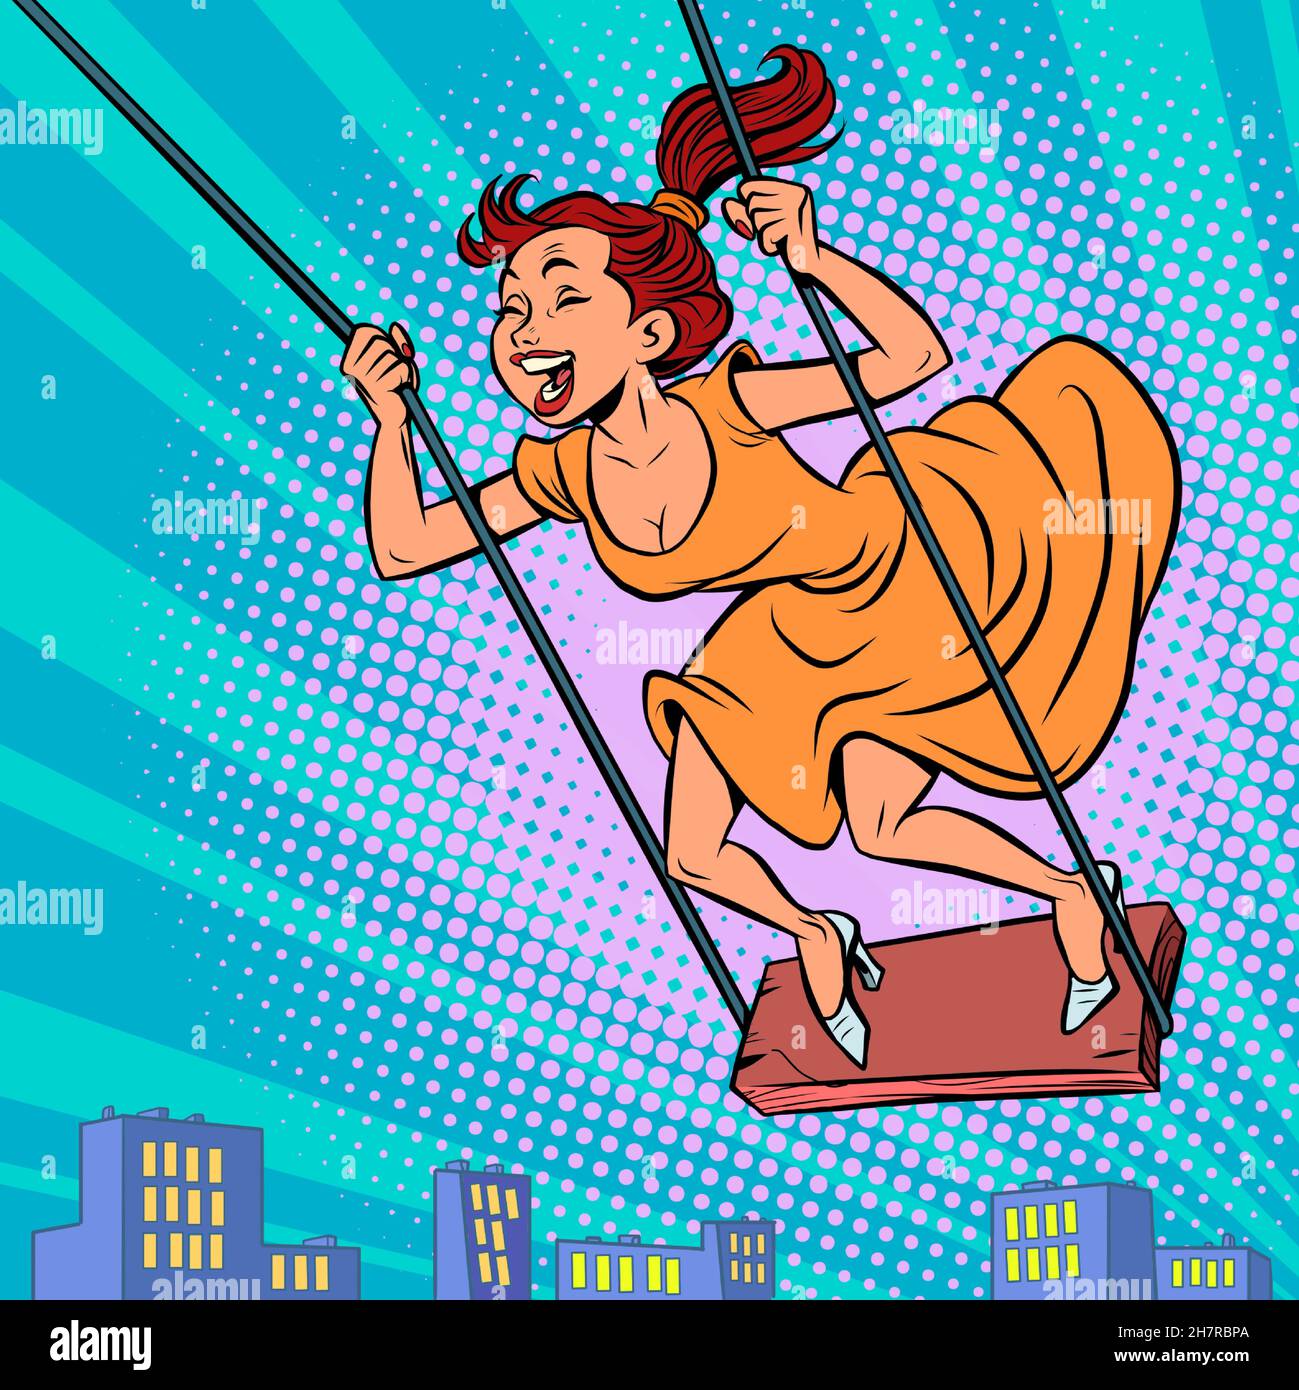 a young woman on a swing, laughing and having fun, flying over the city Stock Vector